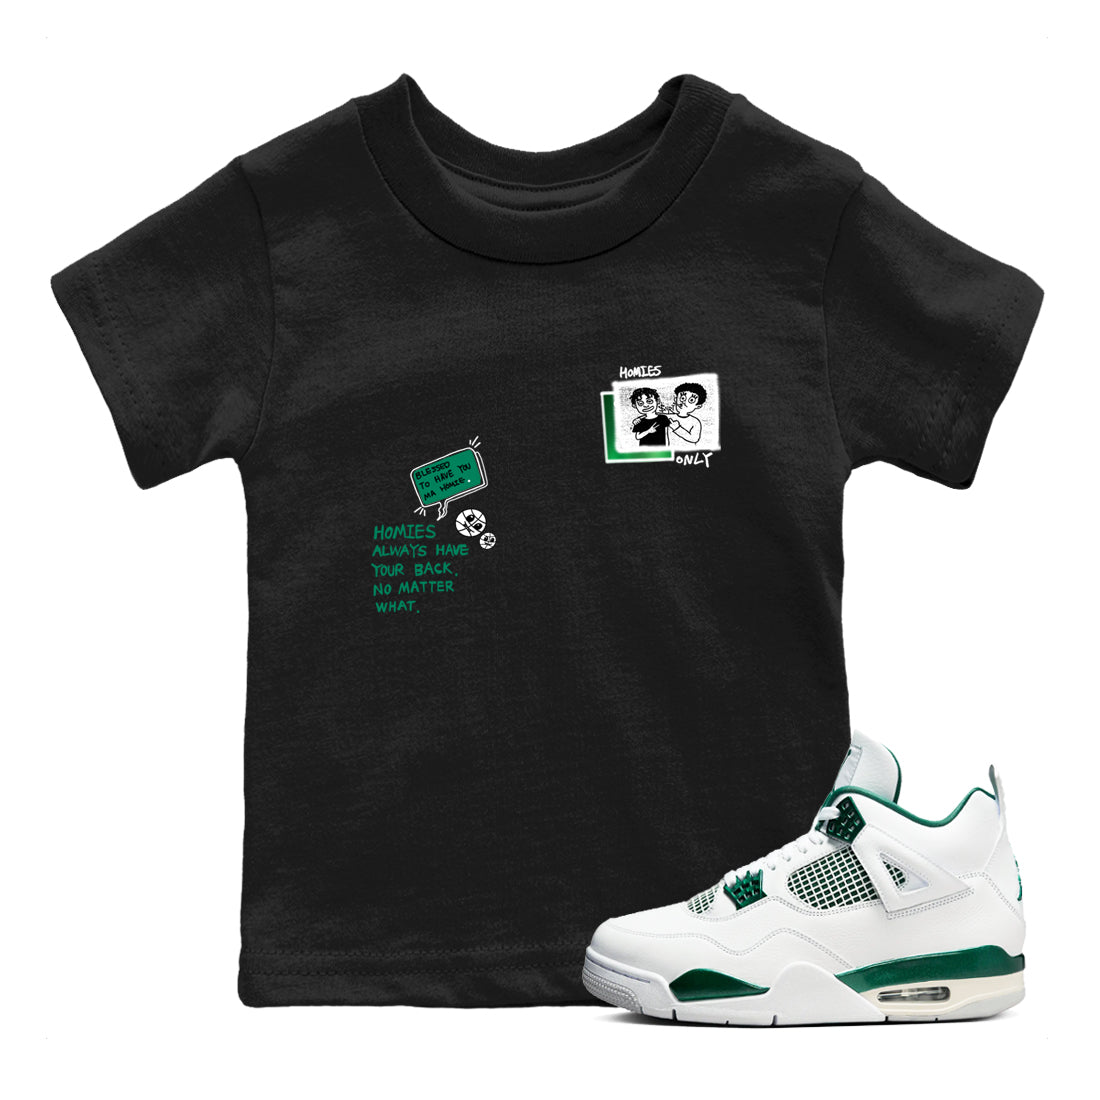 4s Oxidized Green shirts to match jordans Homies Only sneaker match tees Air Jordan 4 Oxidized Green SNRT Sneaker Tees streetwear brand Baby and Youth Black 1 cotton tee